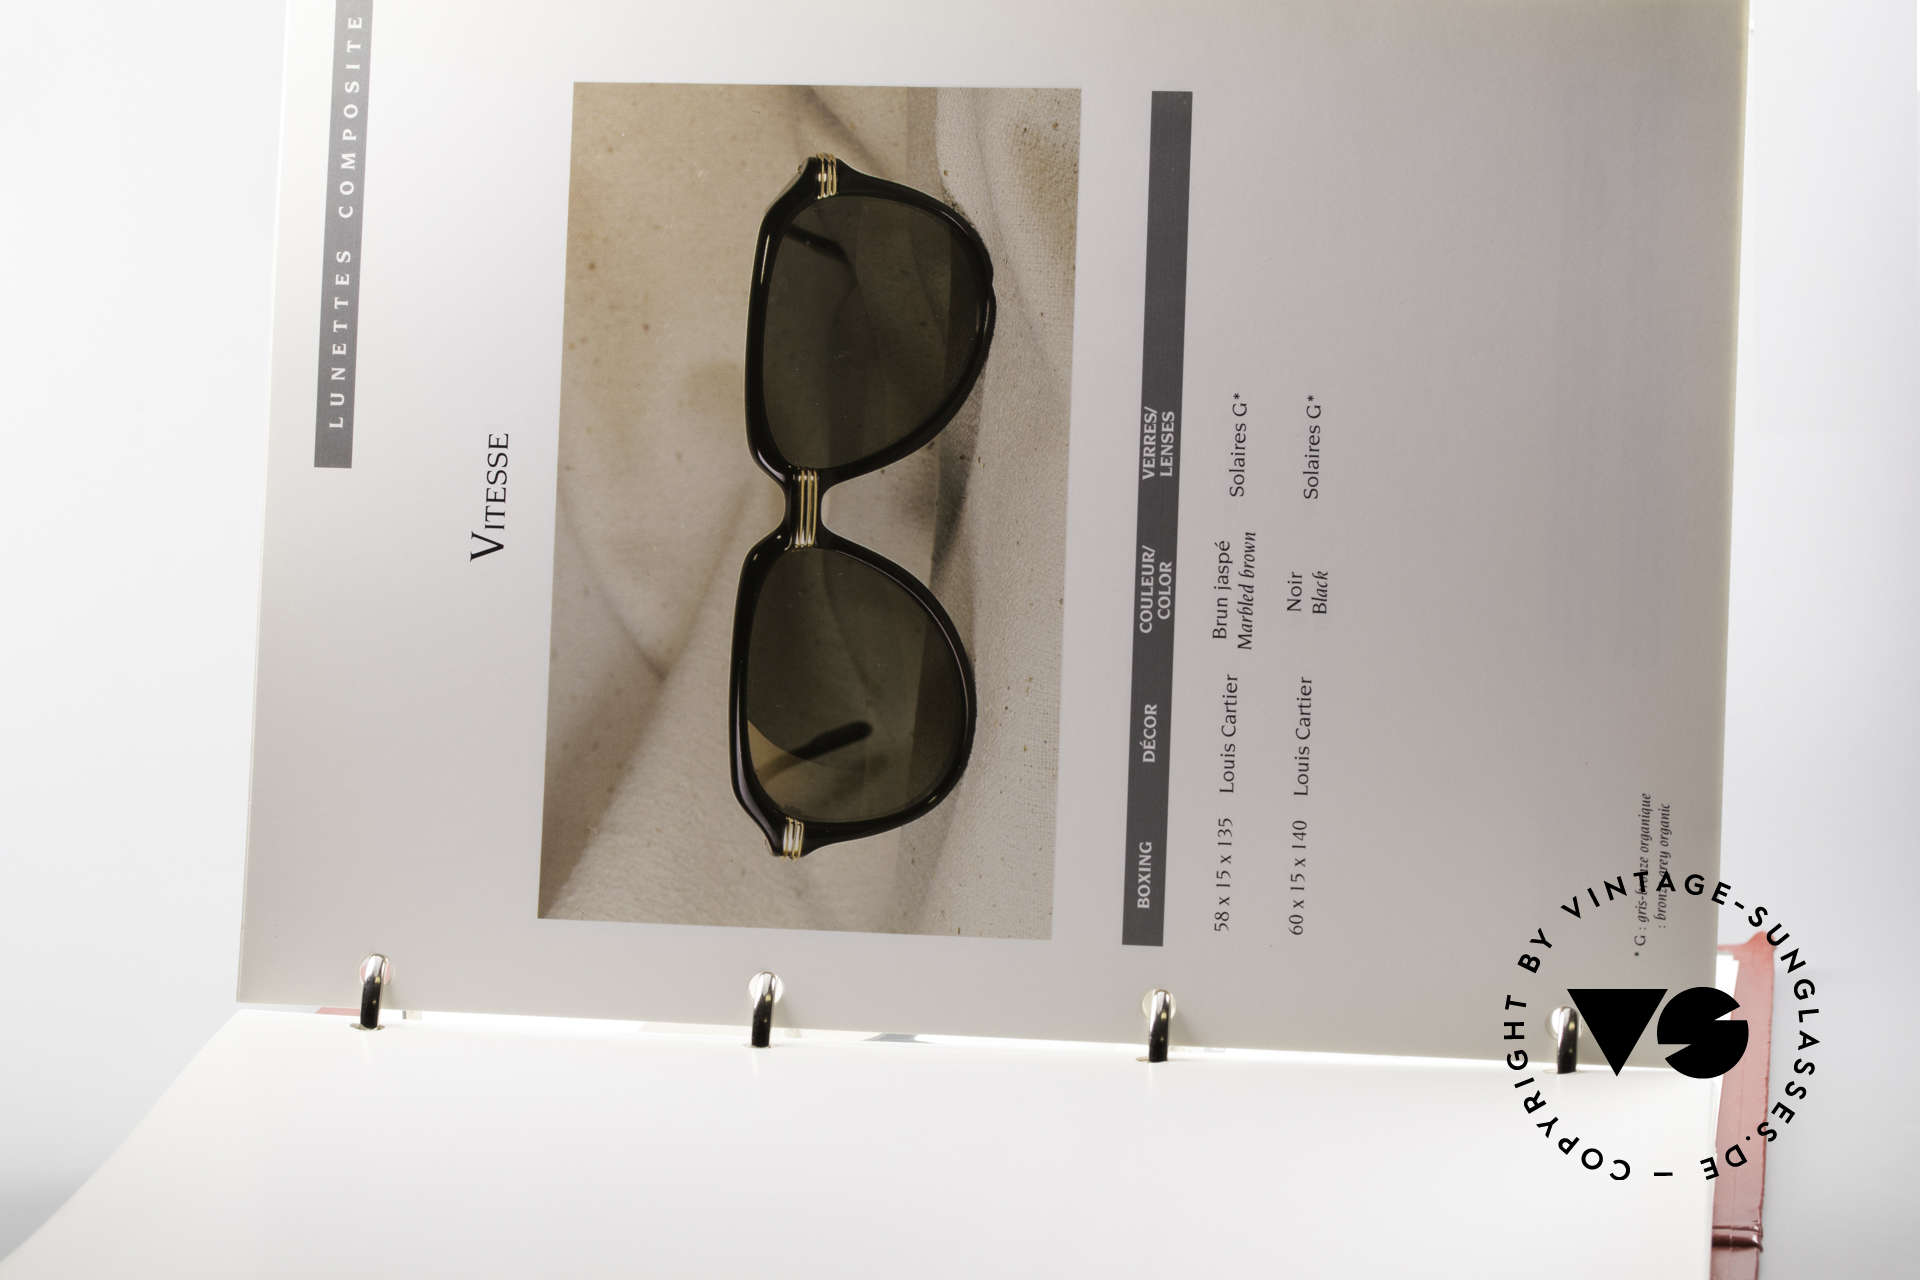 Cartier_ Catalog Cartier Lunettes Eyewear, Size: extra large, Made for Men and Women